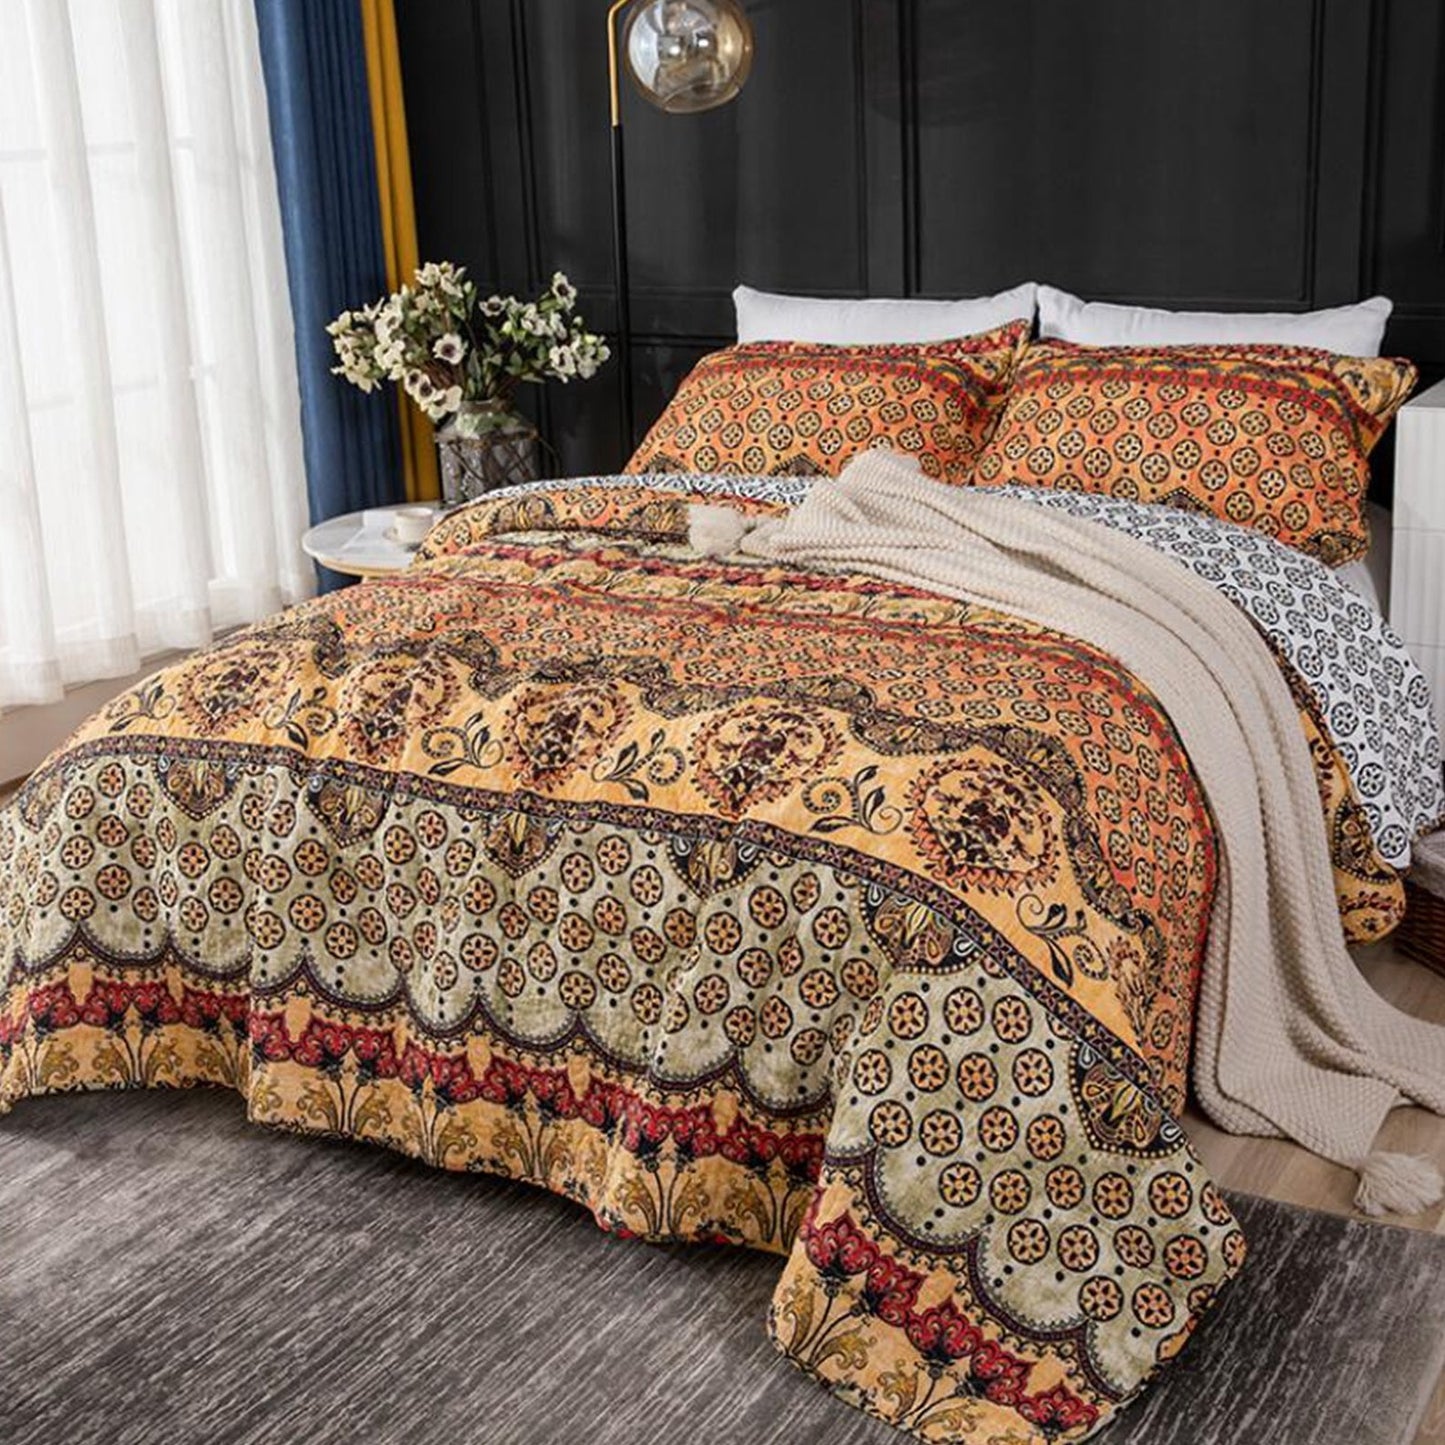 Hand-stitched Bohemian 3 Pieces Boho Quilt Set with 2 Pillowcases